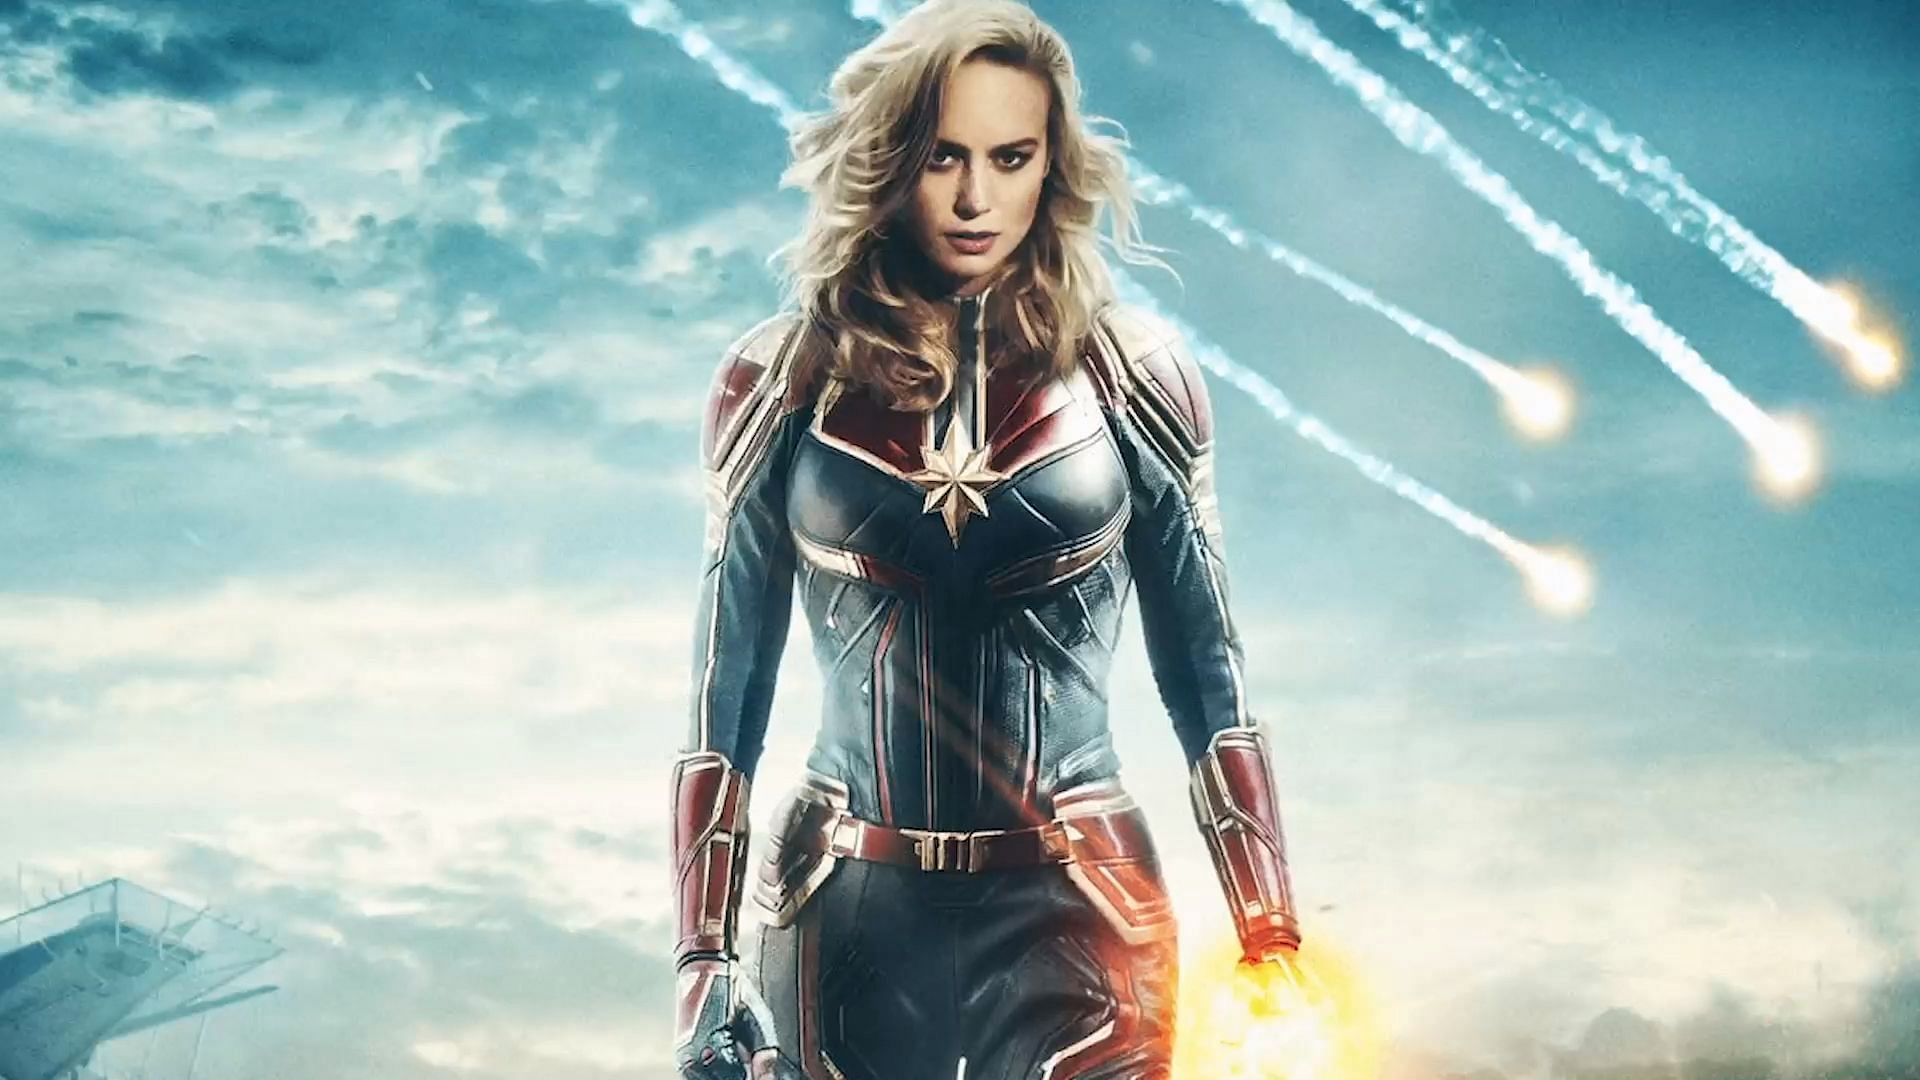 The Energy Absorber - Captain Marvel possesses incredible strength, speed, and the ability to manipulate energy, making her a formidable opponent (Image via Marvel Studios)